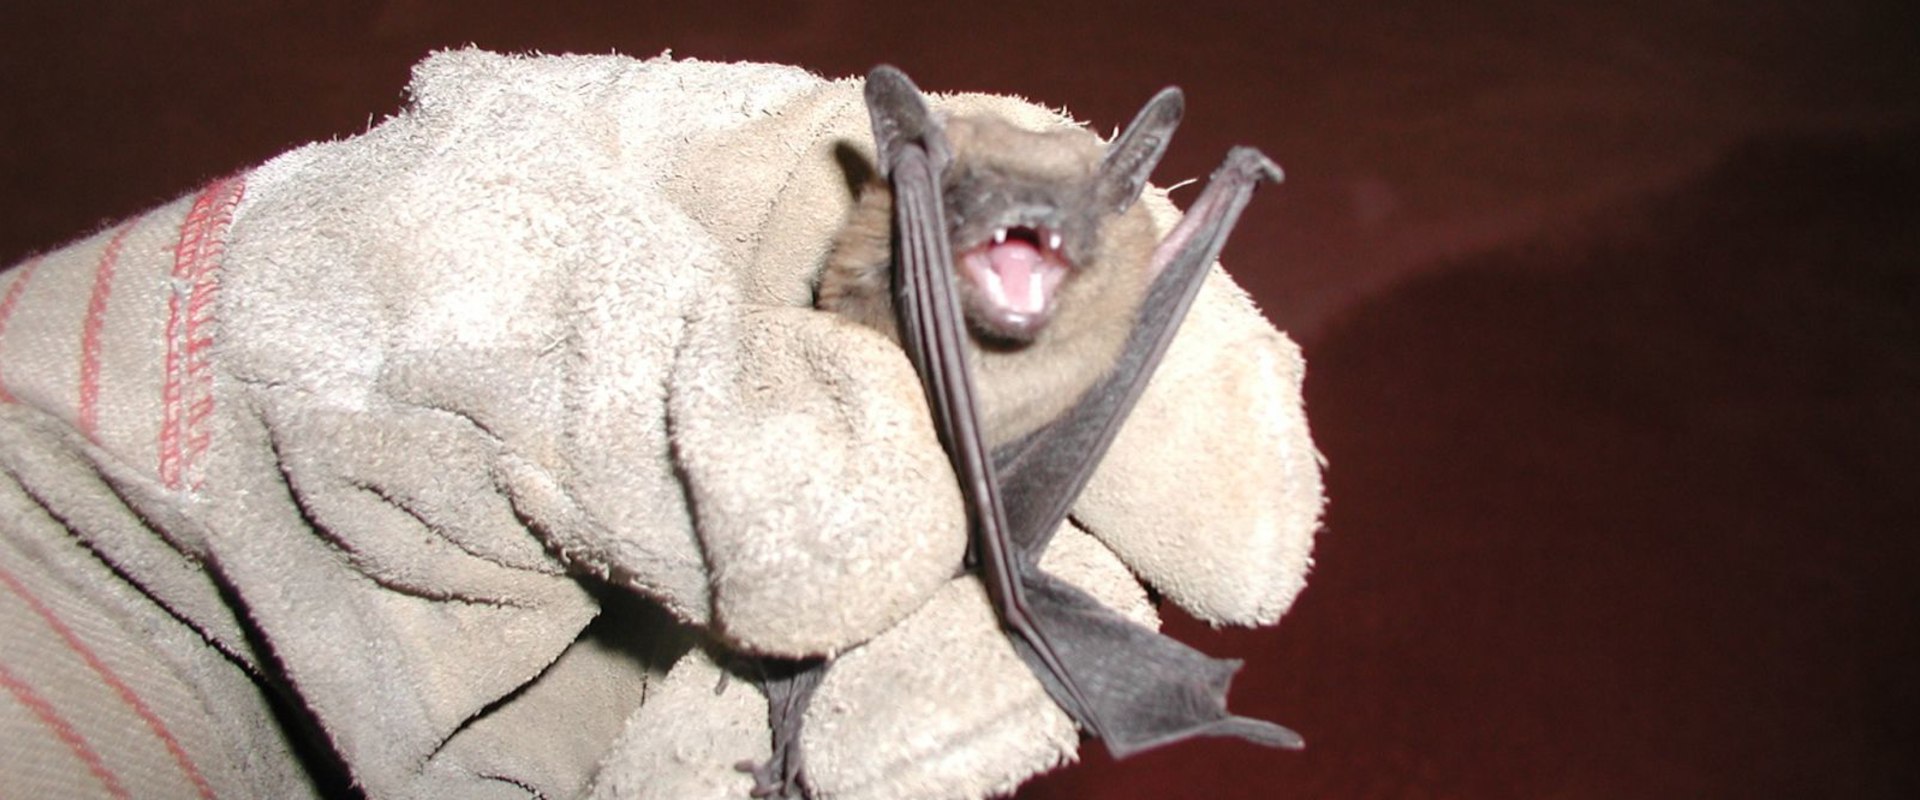 Keeping Bats And Rodents Out Of Your Montgomery, Texas Home